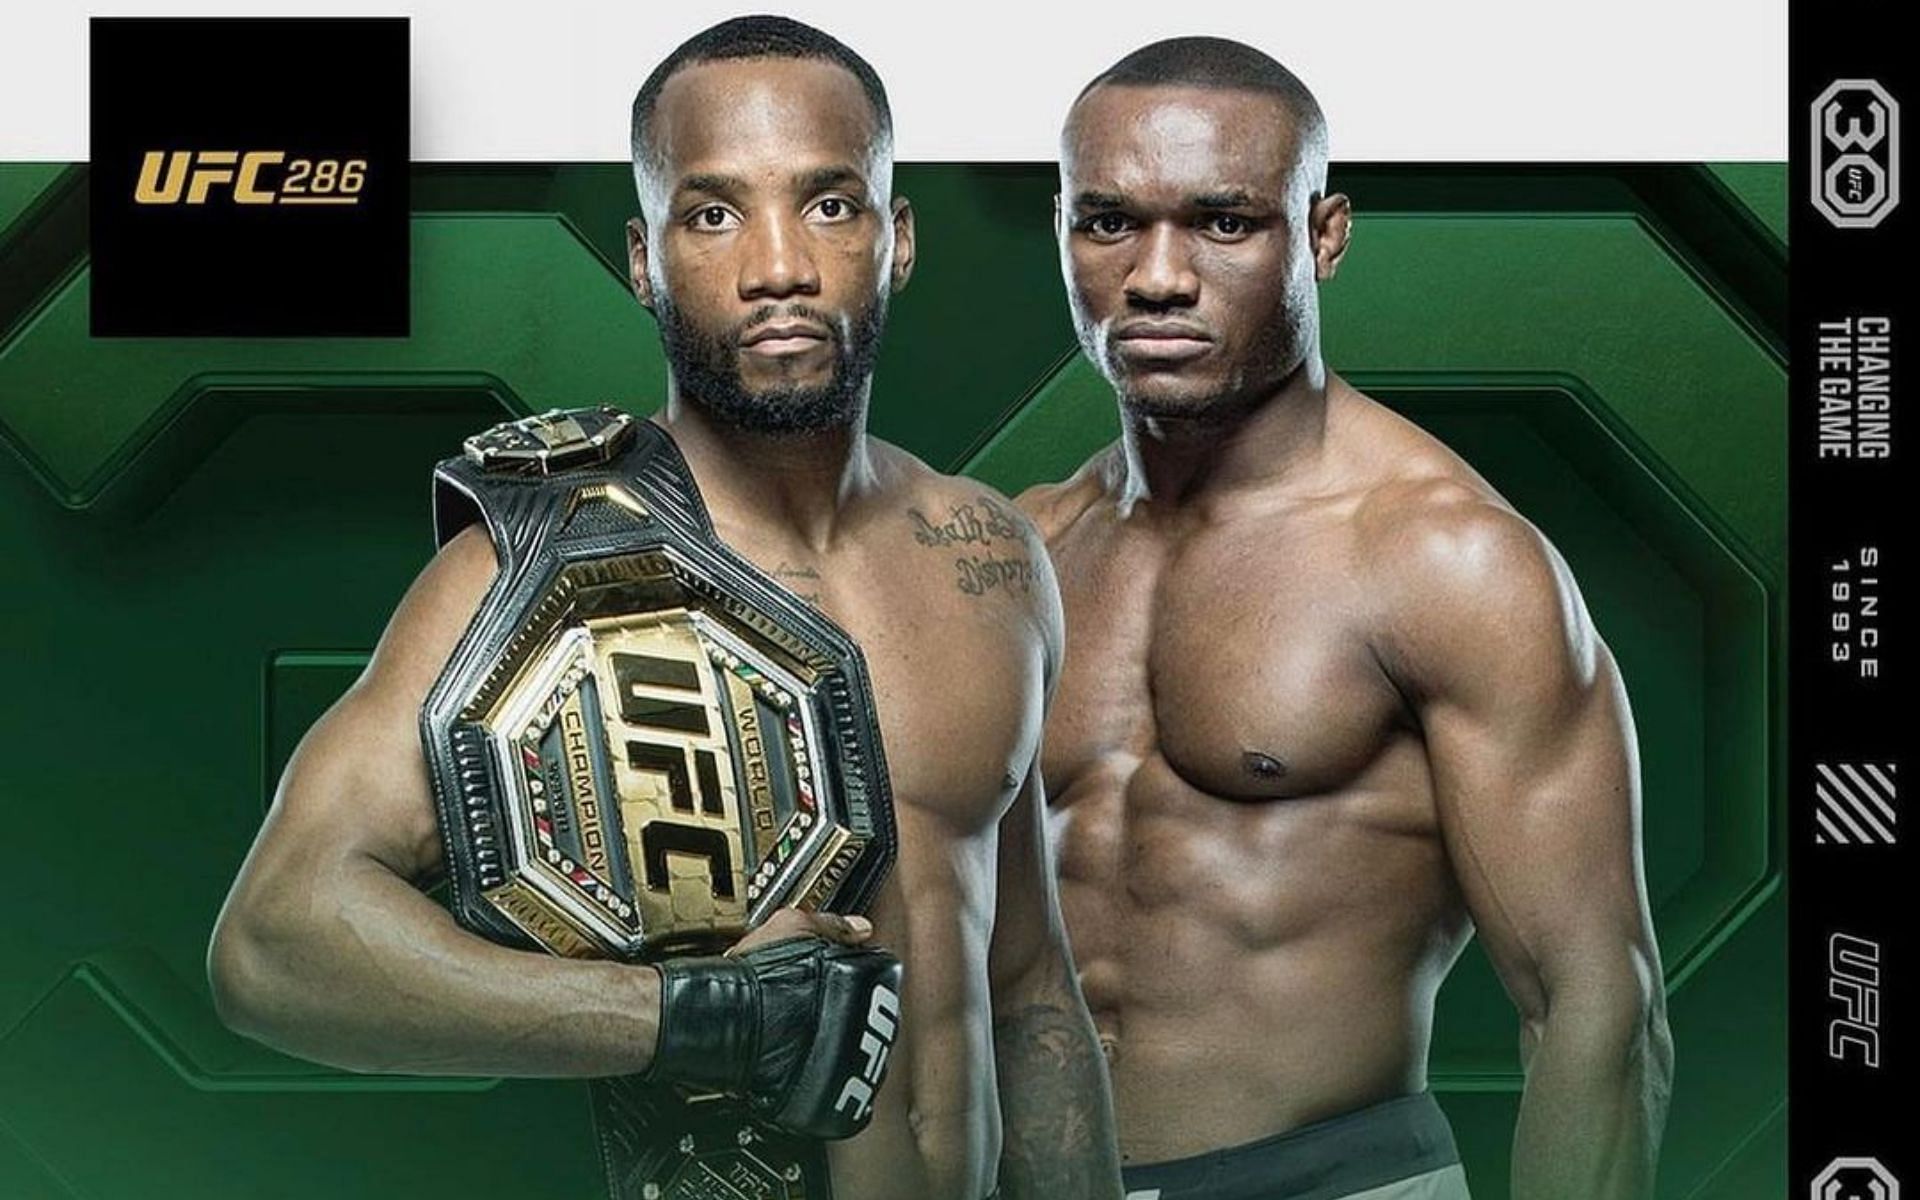 How to Watch UFC 286: Leon Edwards vs Kamaru Usman 3: Check UFC 286 Live Streaming Details and Start Time